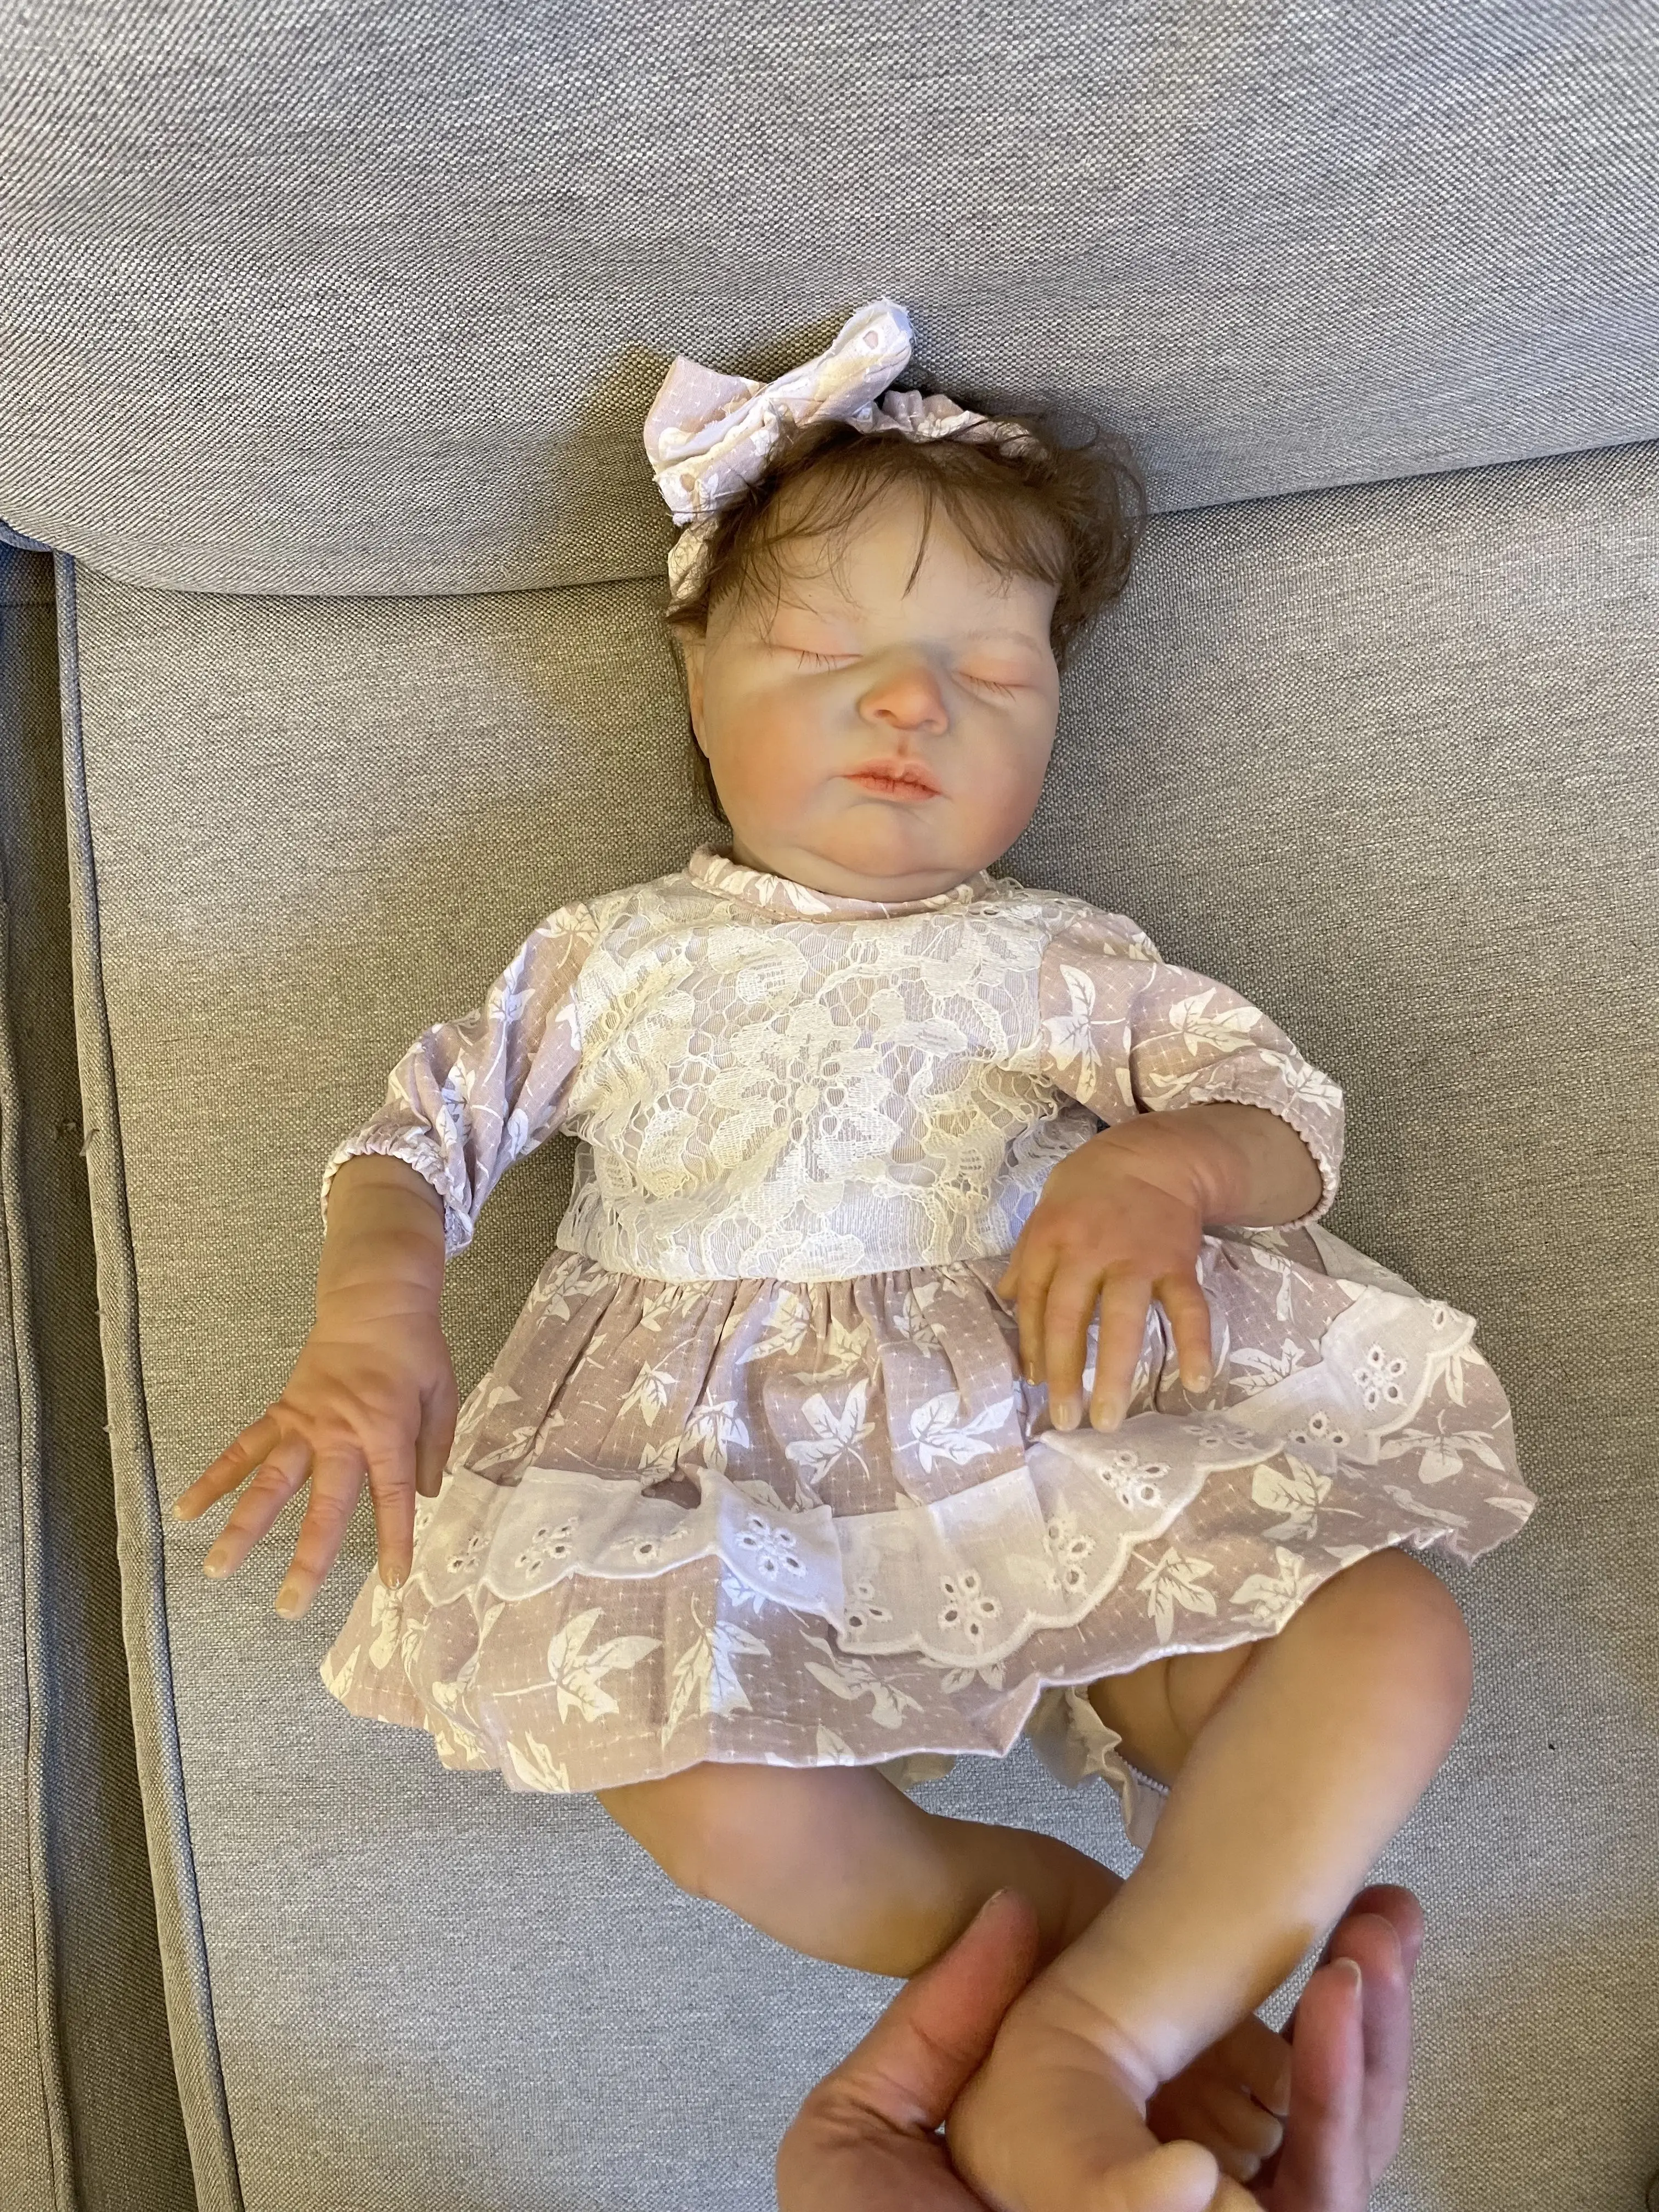 

FBBD 50cm Already Finished Reborn Baby Doll Laura Painted By Arttist Lifelike With Hand-Rooted Hair Toys For Children